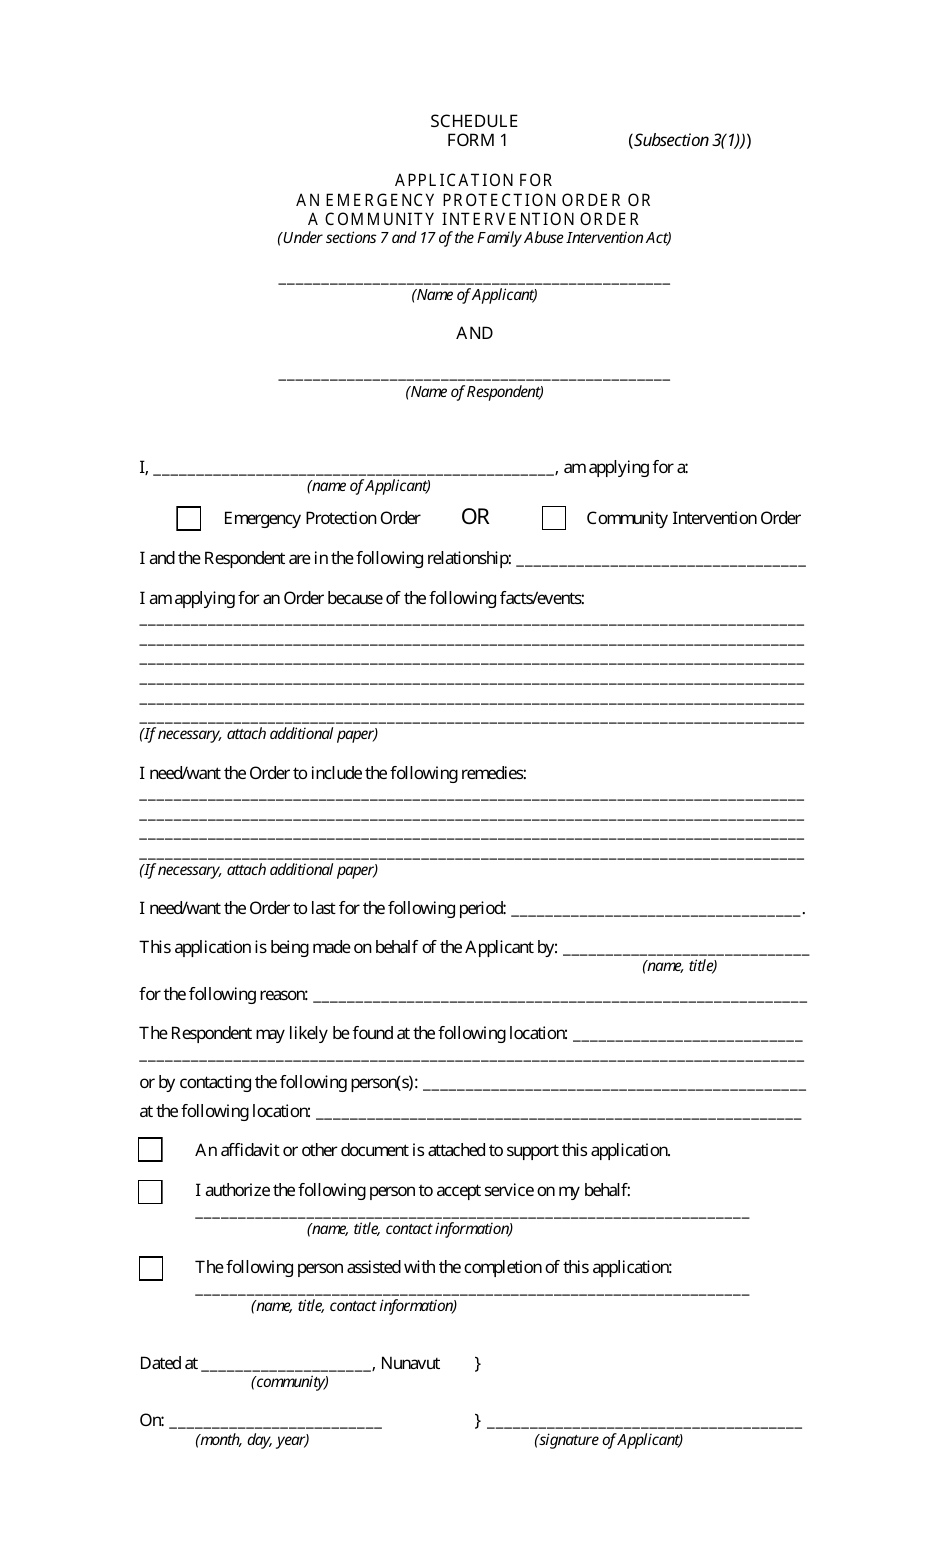 Form 1 Application for an Emergency Protection Order or a Community Intervention Order - Nunavut, Canada, Page 1